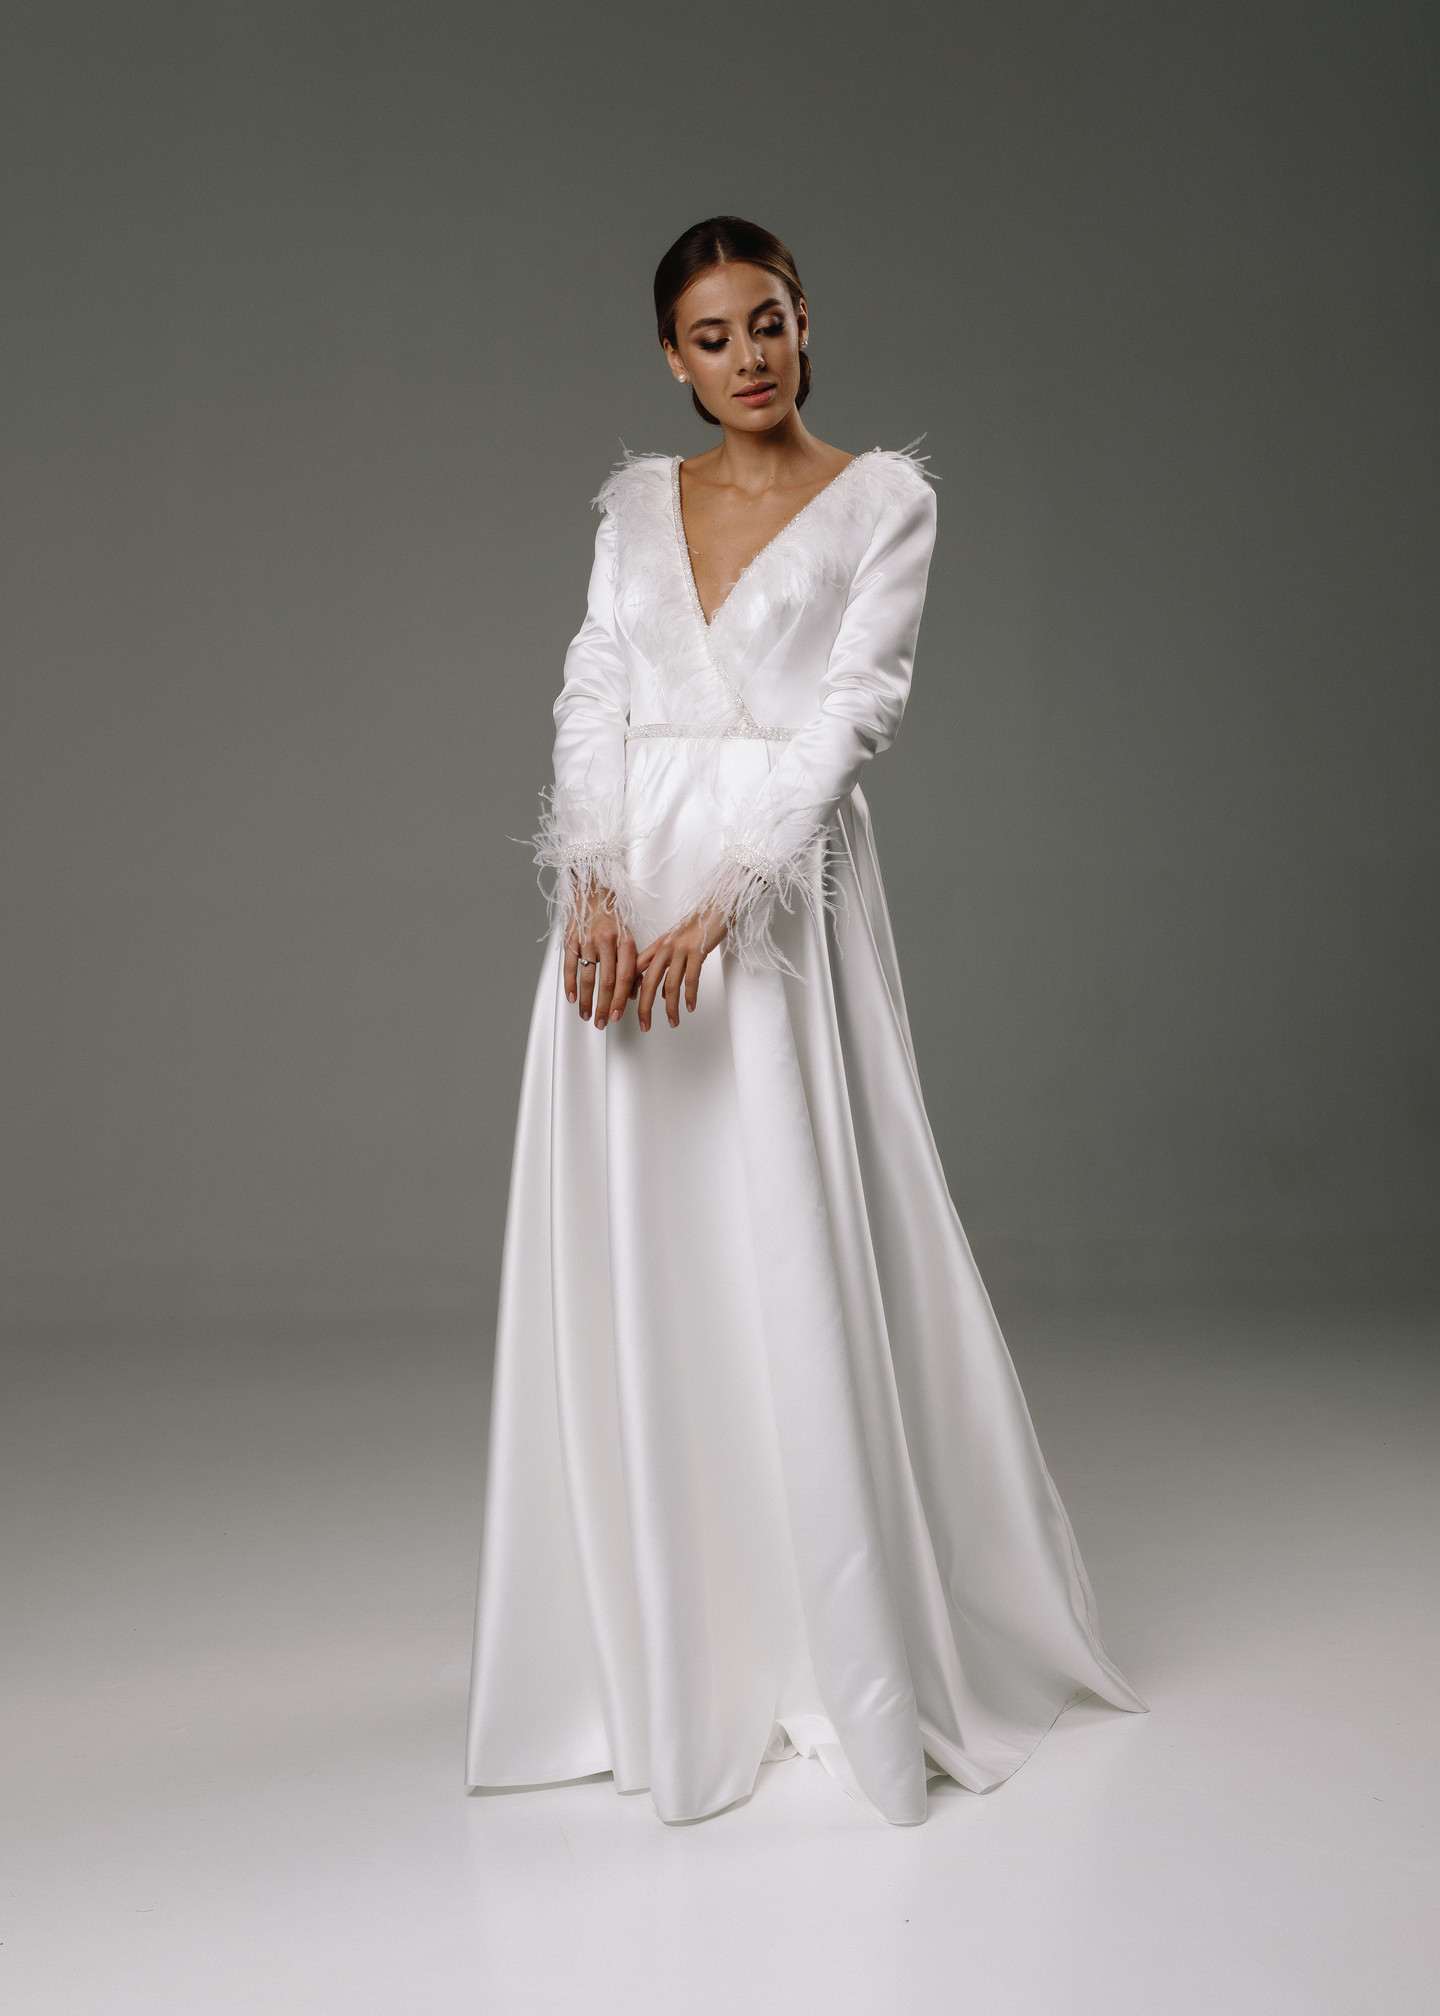 Anisya gown, 2020, couture, dress, bridal, off-white, satin, embroidery, A-line, sleeves, discount, sale